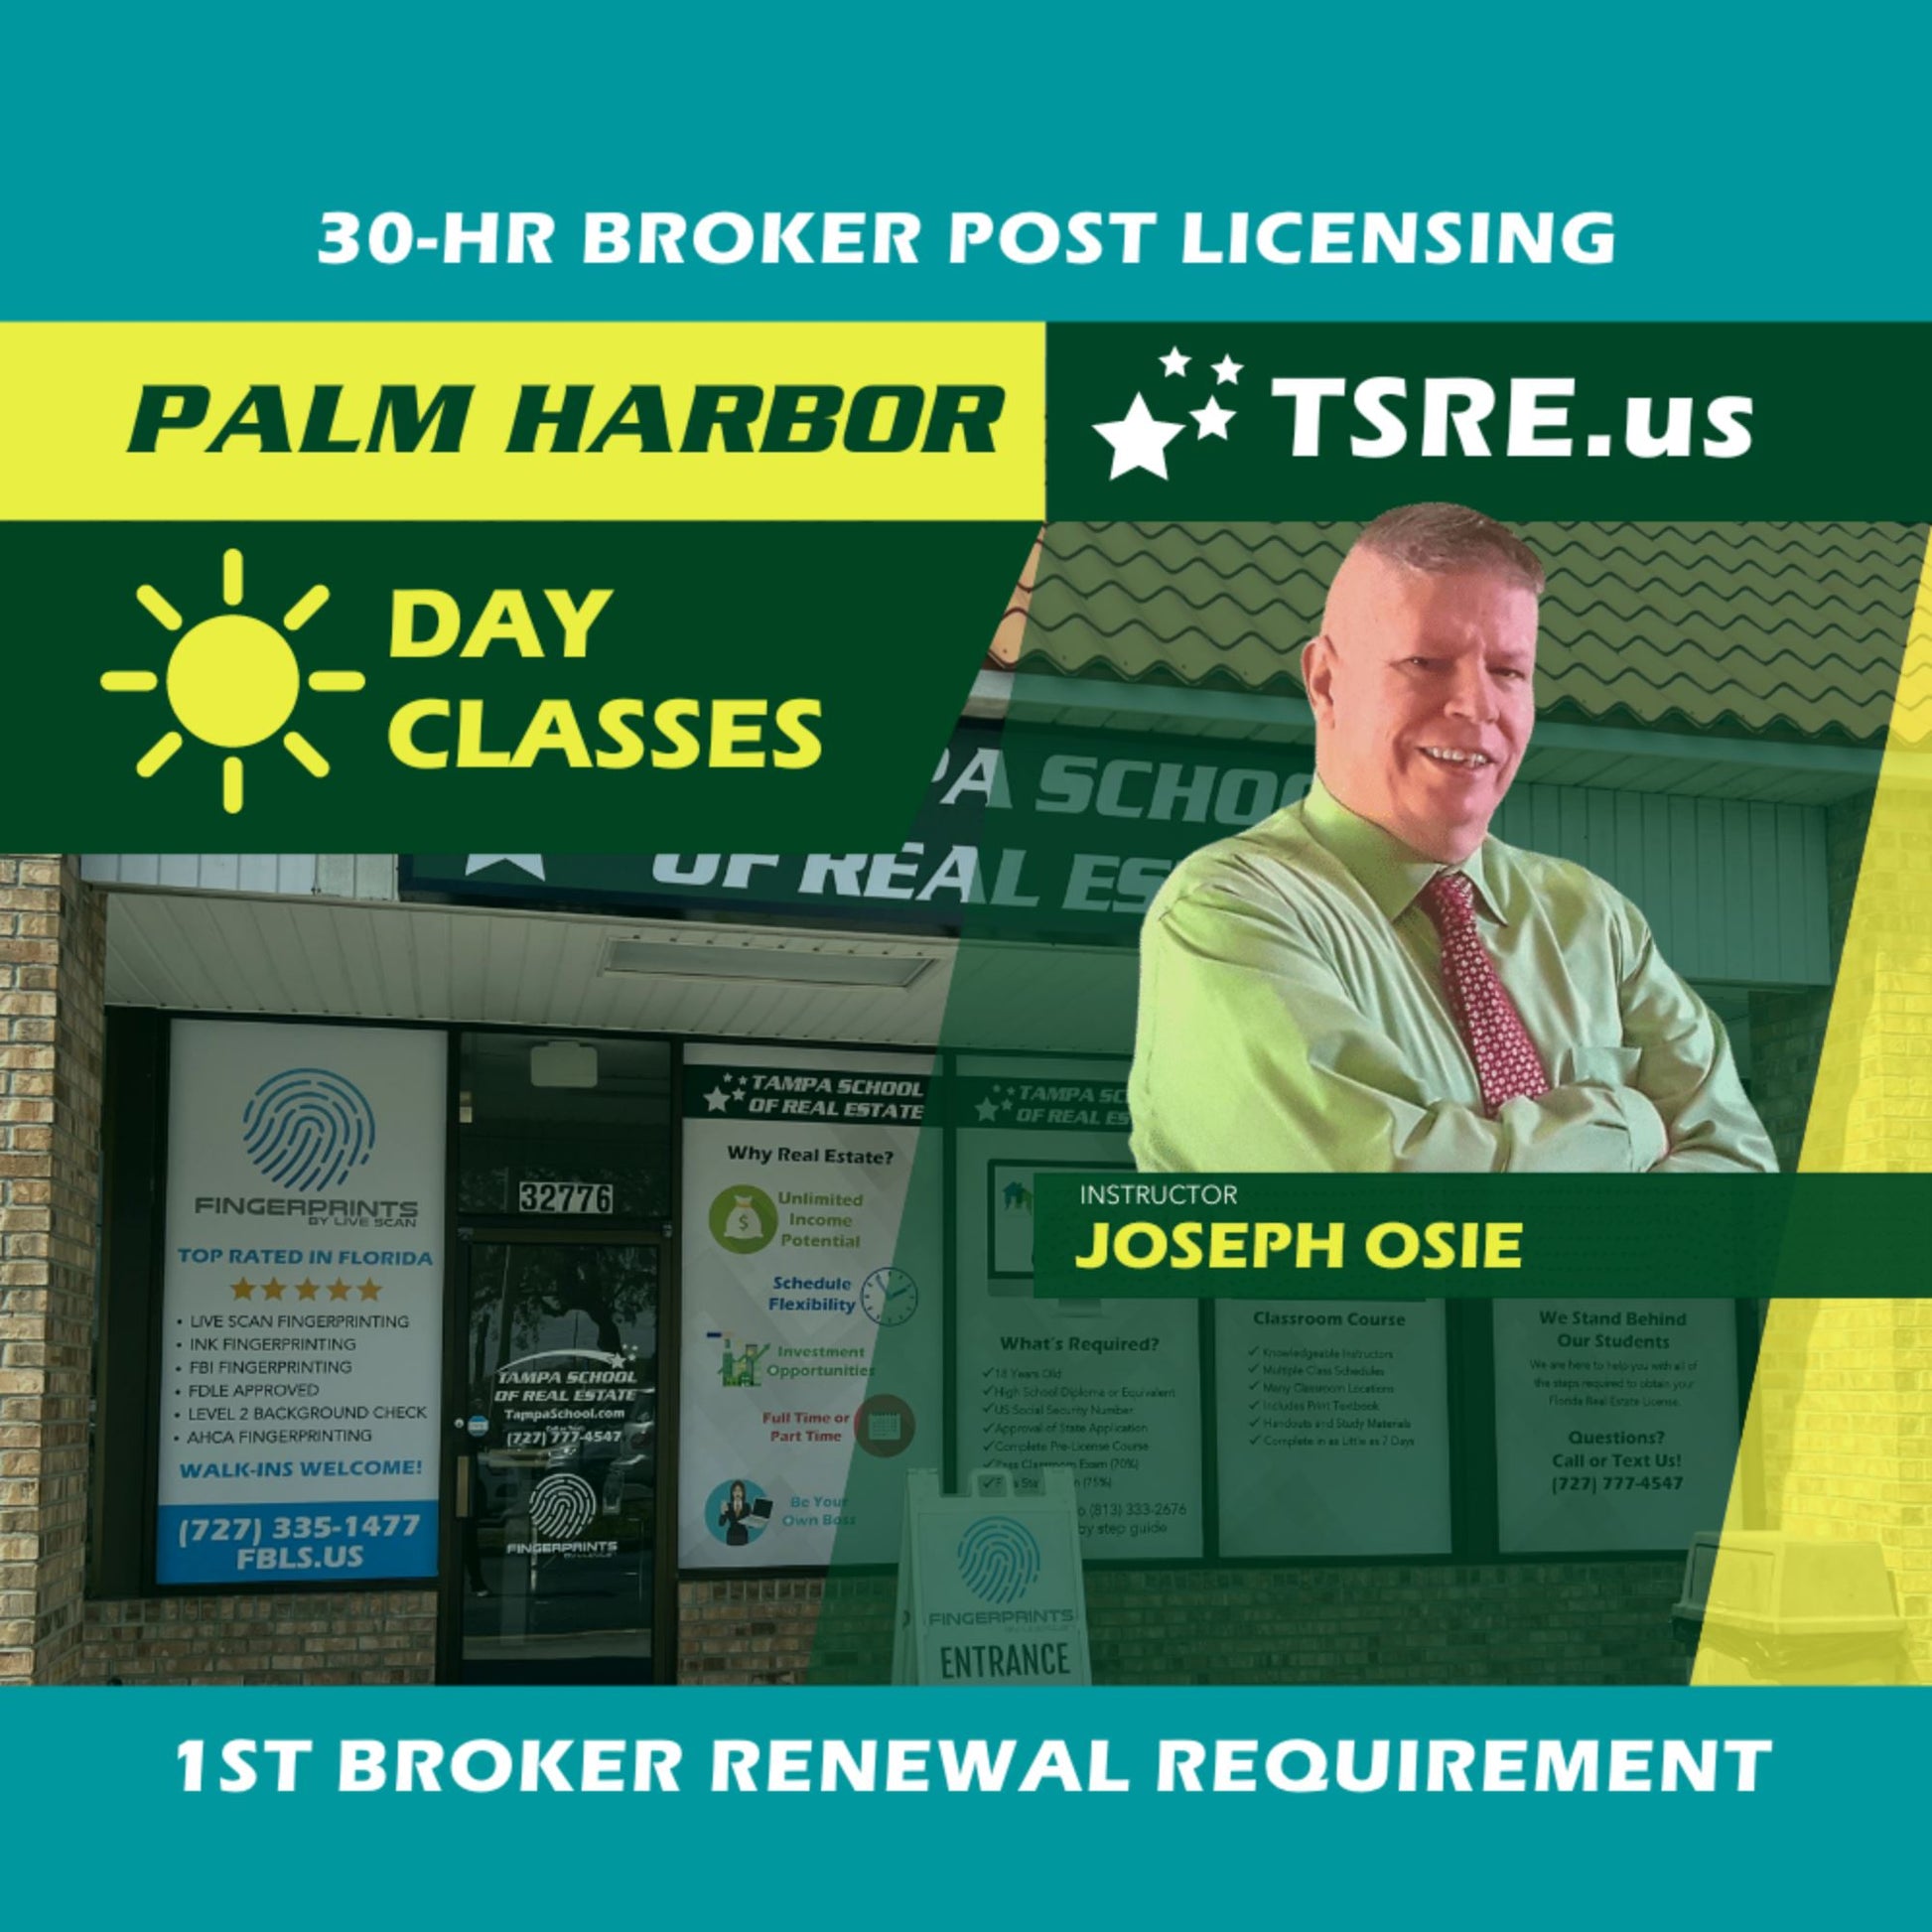 Palm Harbor | Sep 22 9:00am | BKFIN TSRE Palm Harbor | Tampa School of Real Estate 